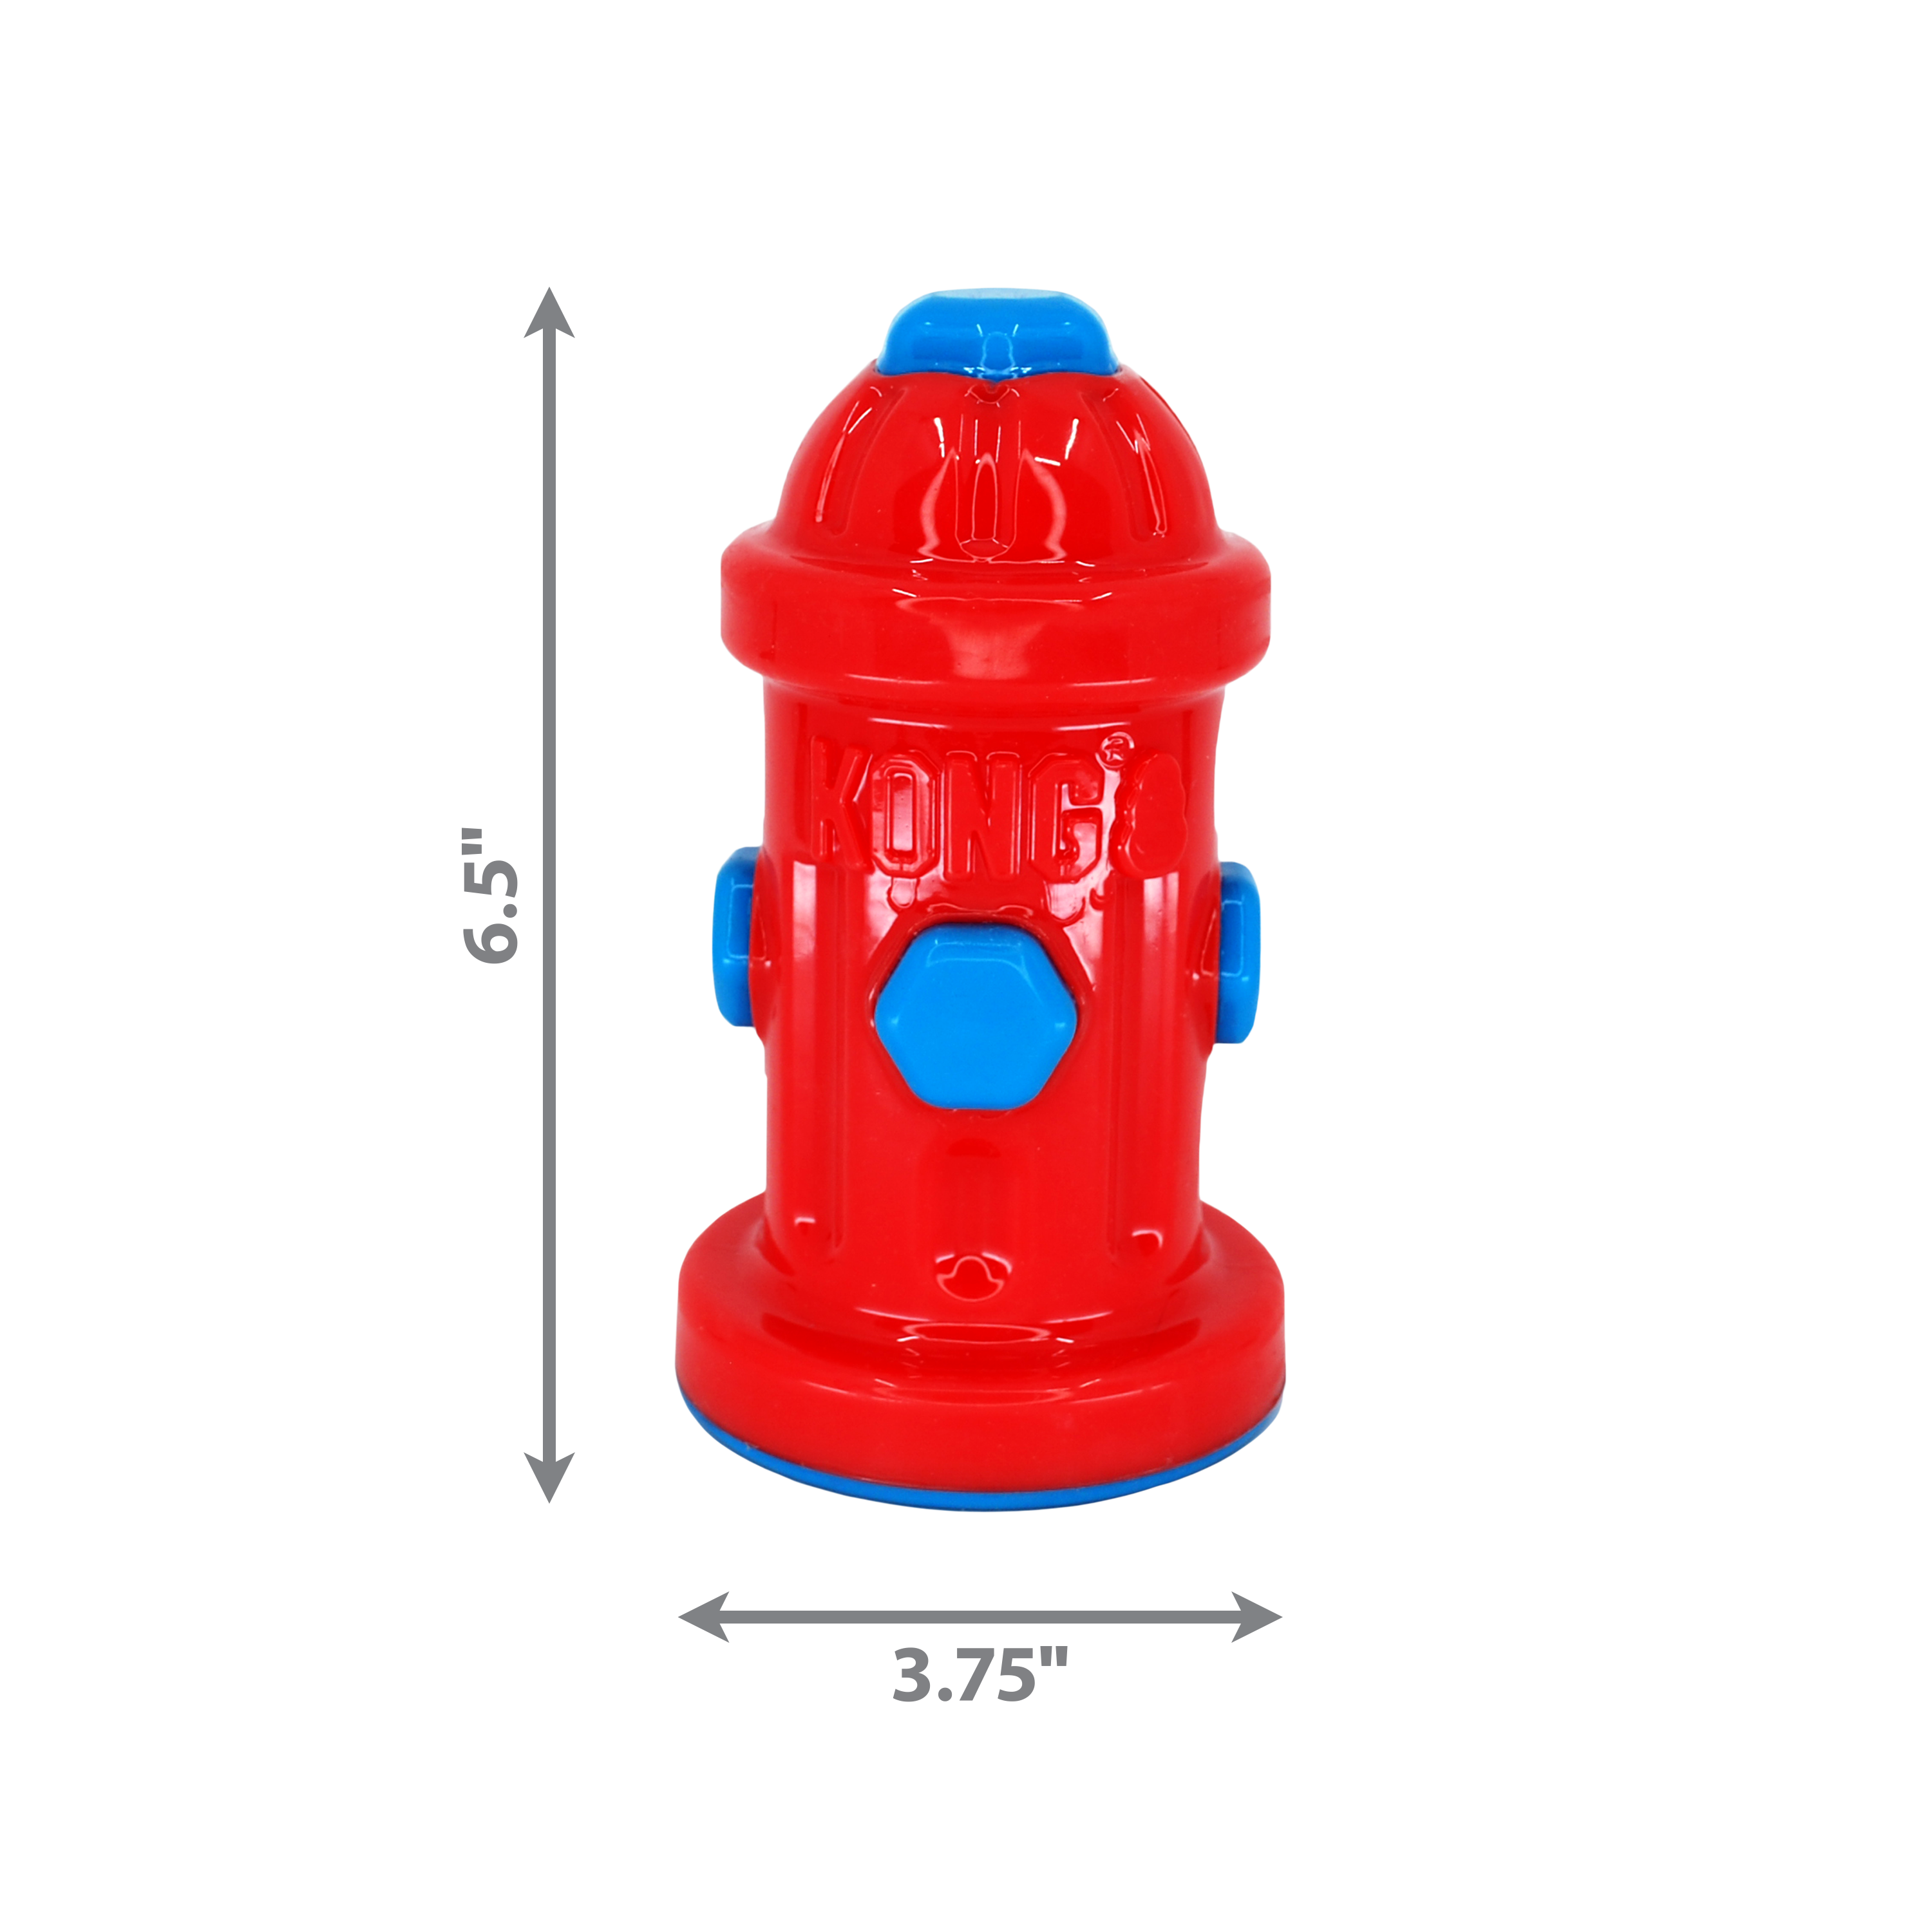 Imagen del producto Eon Fire Hydrant dimoffpack